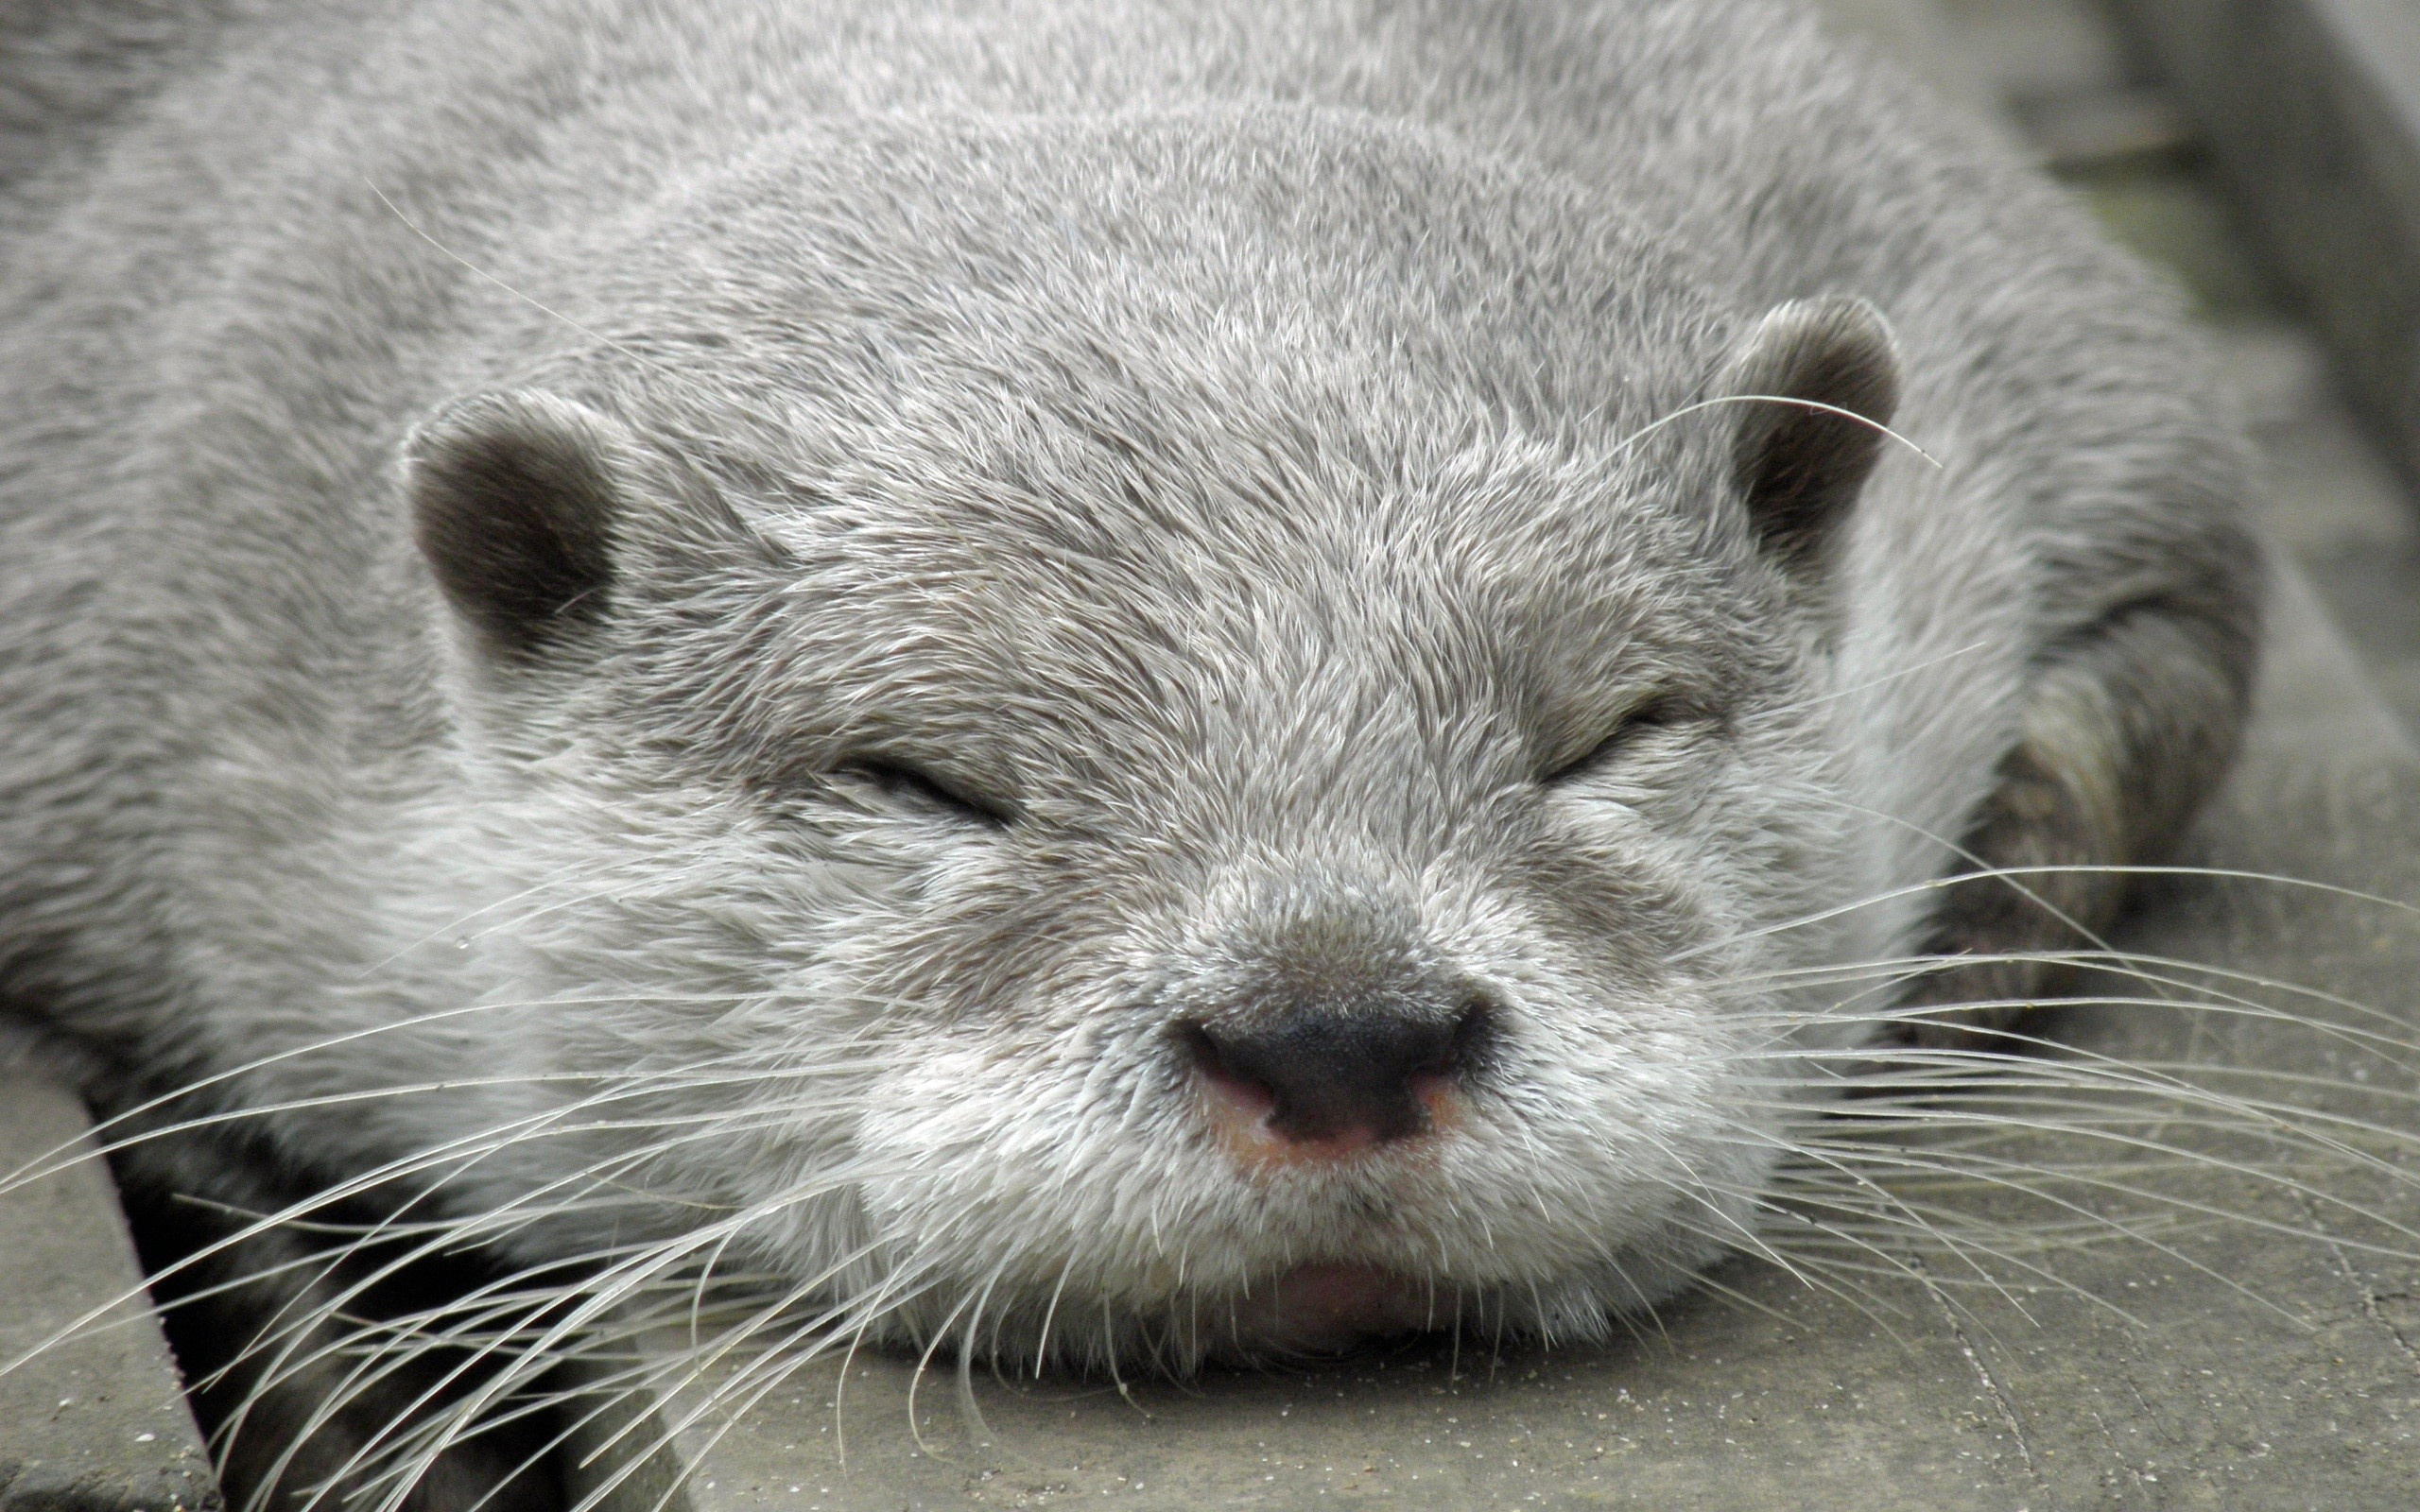 Sleeping otter serenity, Peaceful slumber, Dreaming in tranquility, Relaxing wallpaper choice, 2560x1600 HD Desktop